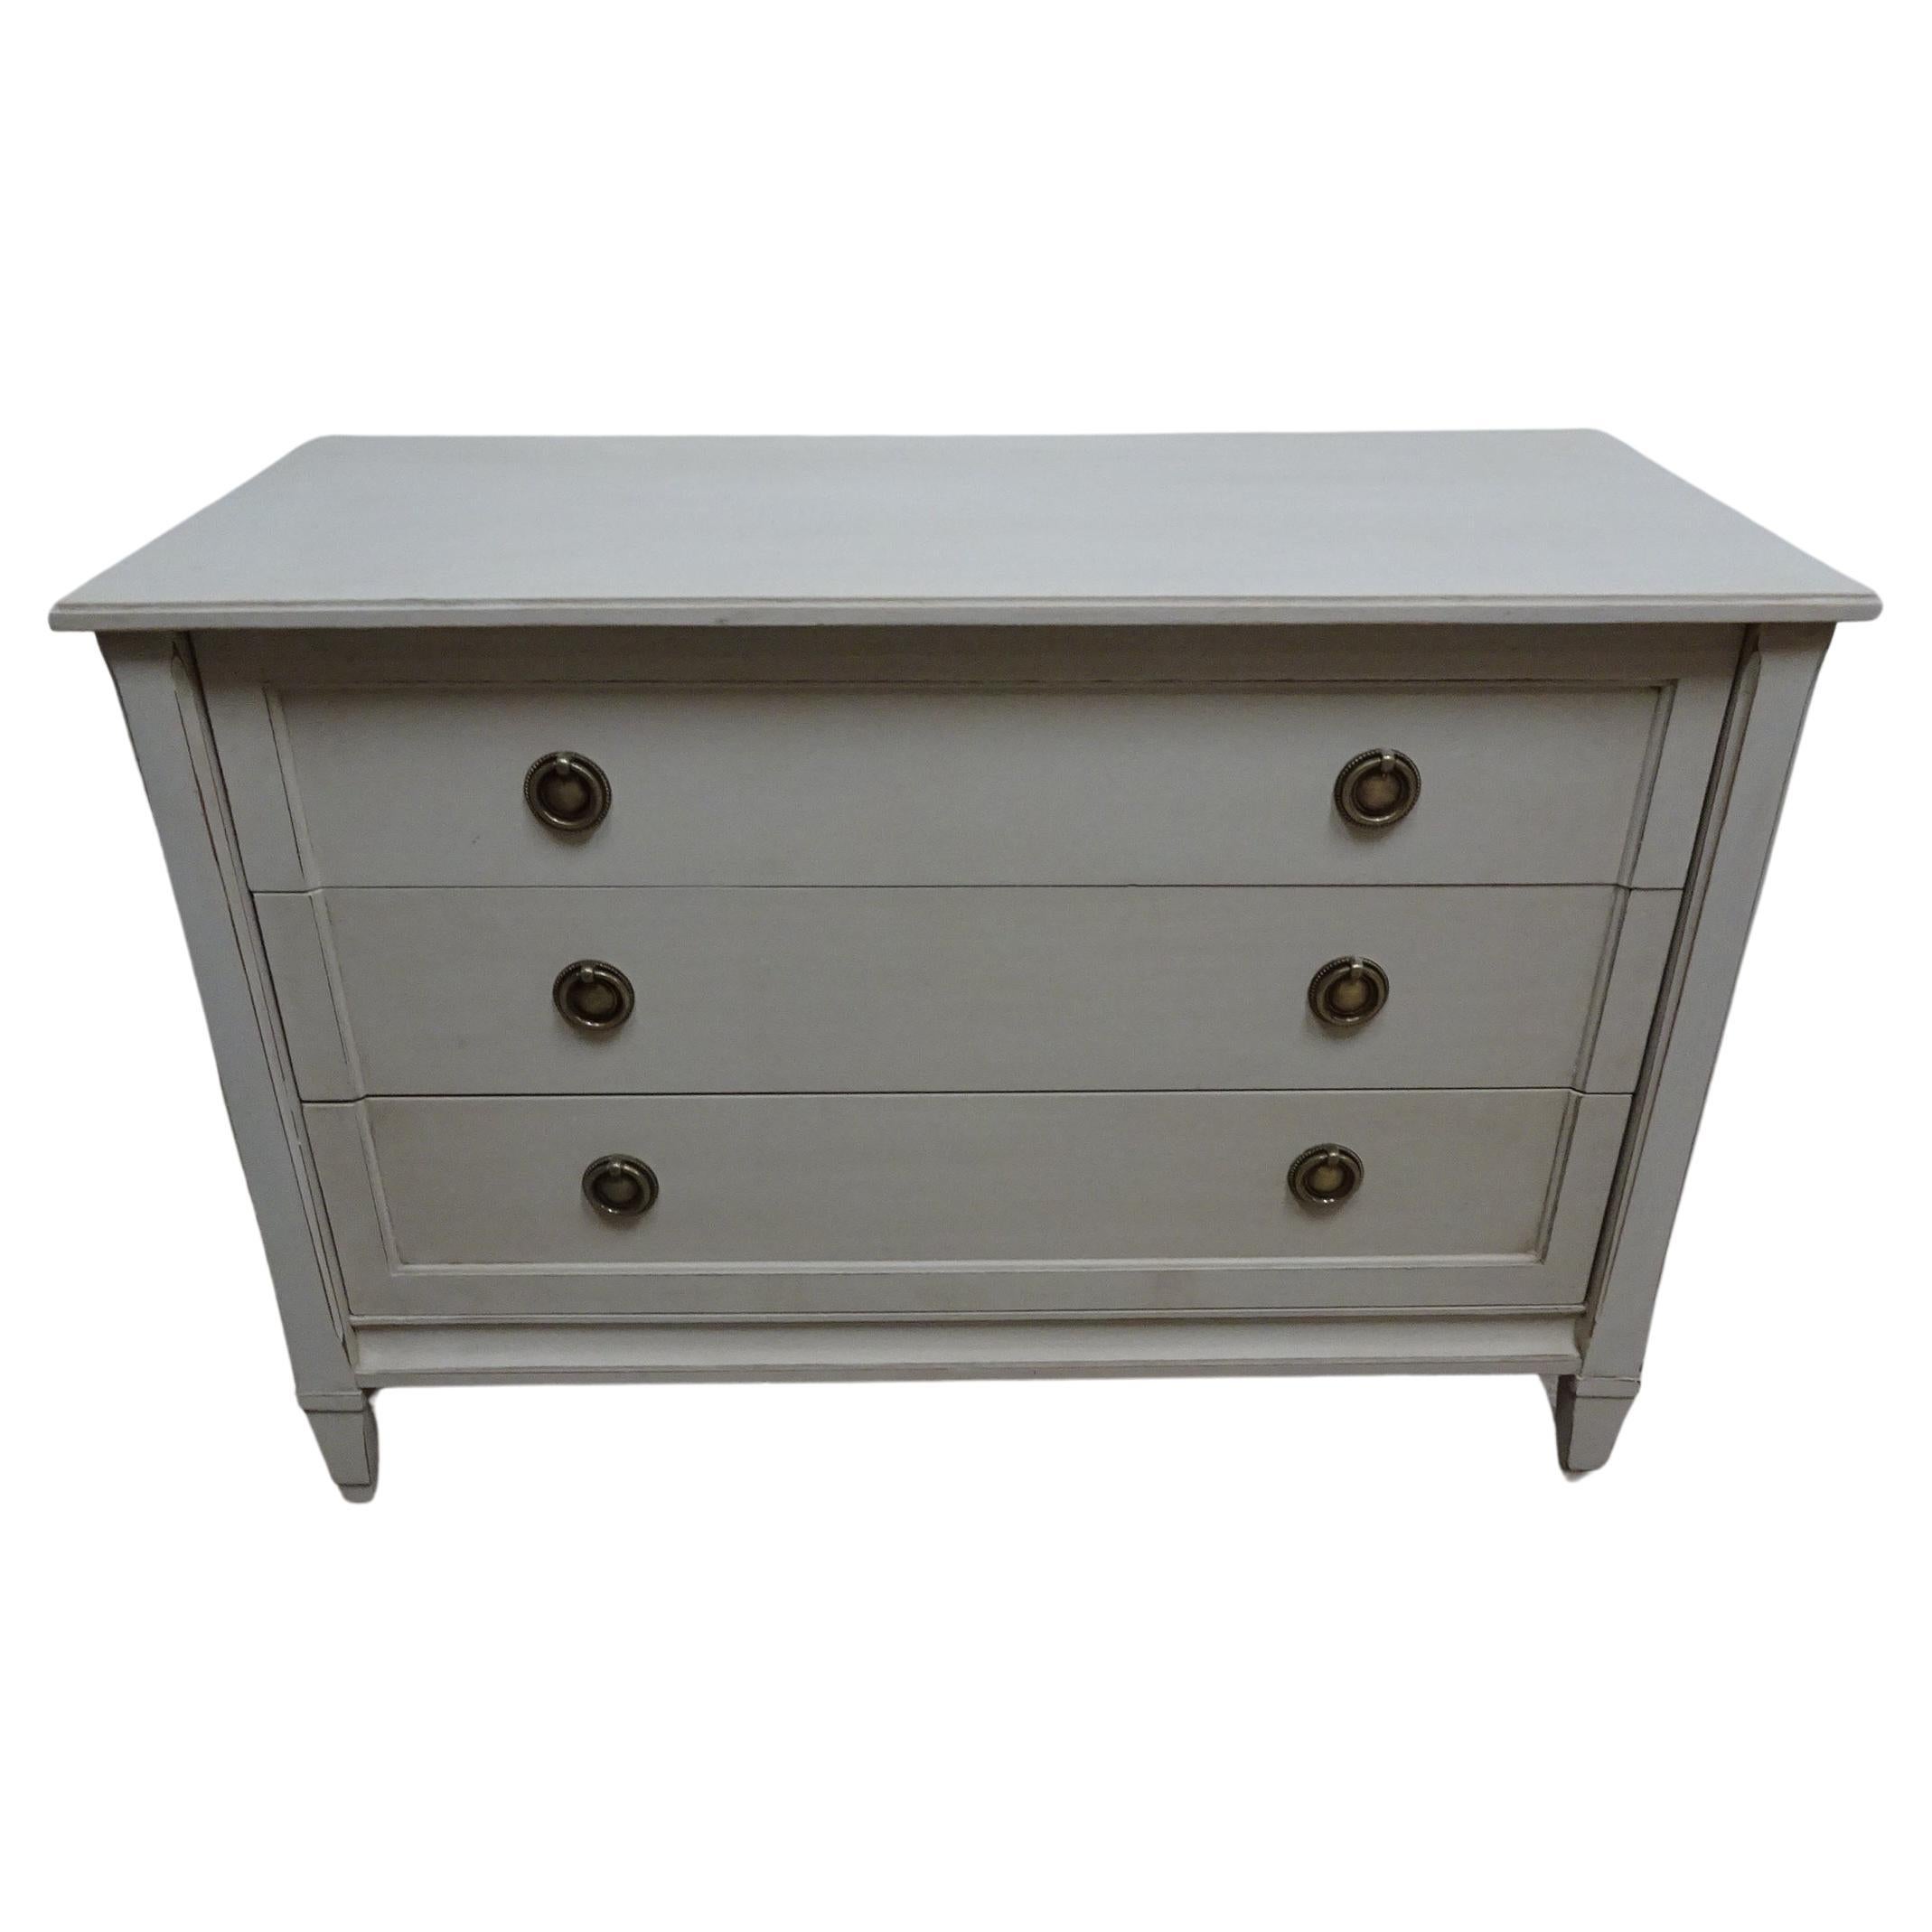   Gustavian Style 3 Drawer Chest Of Drawers